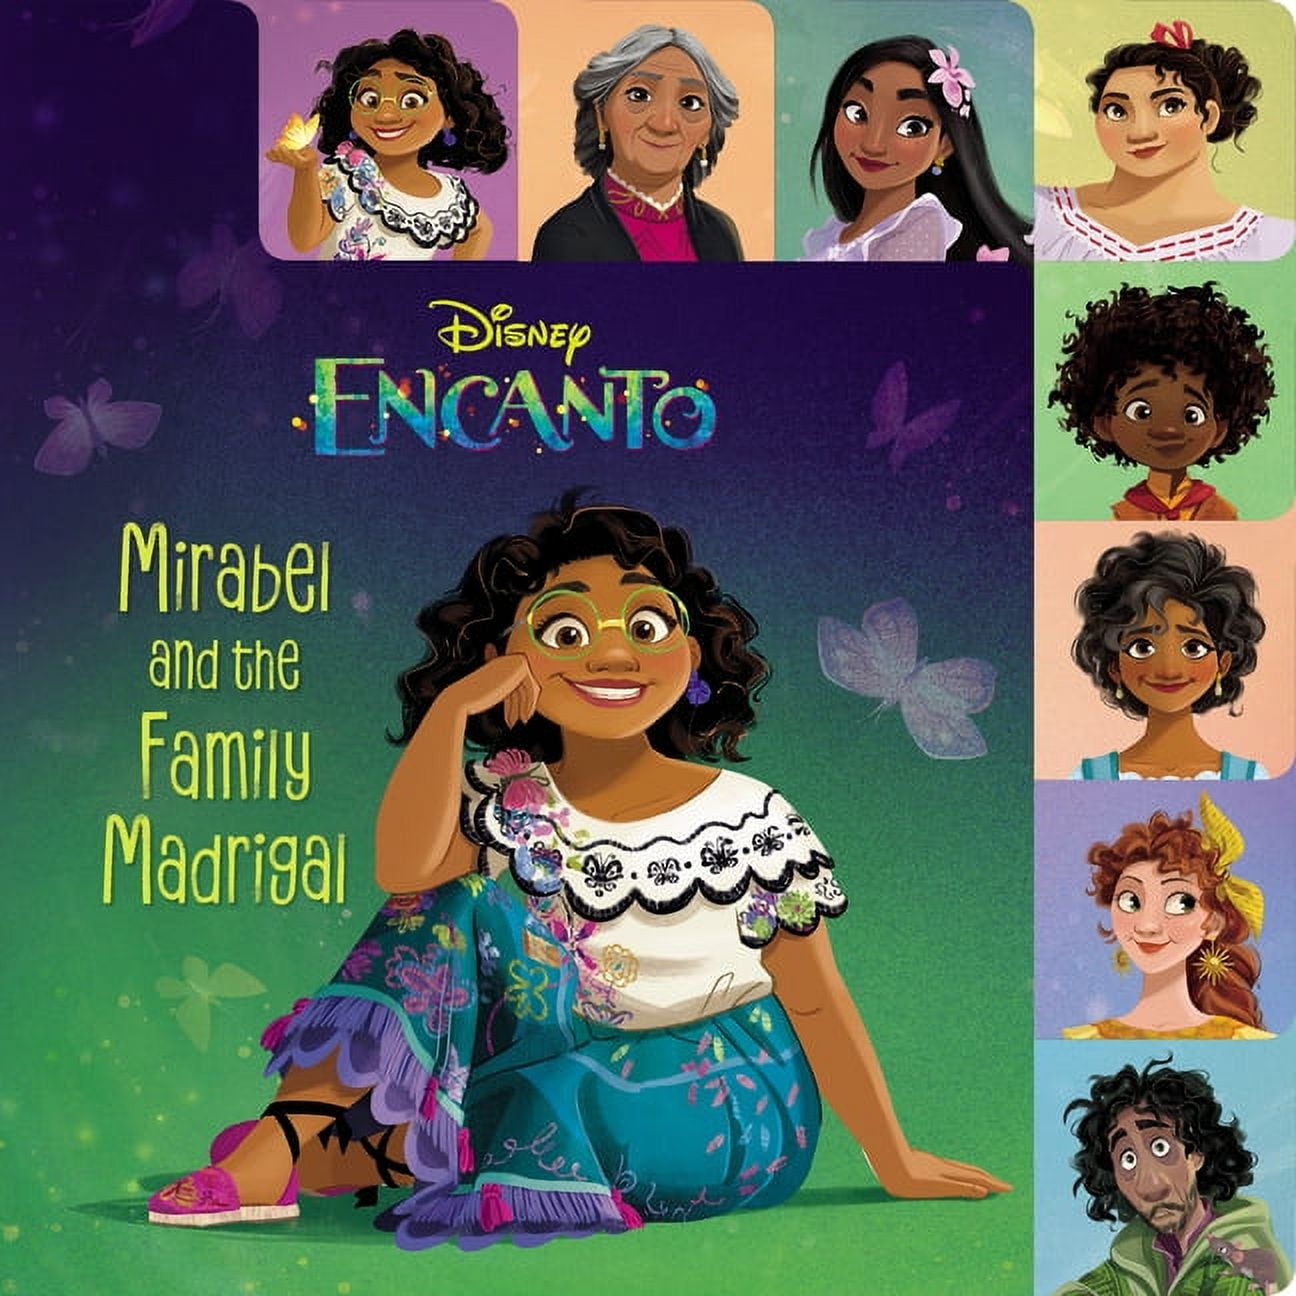 Join the Family Madrigal with 'The Art of Encanto' - WDW Magazine